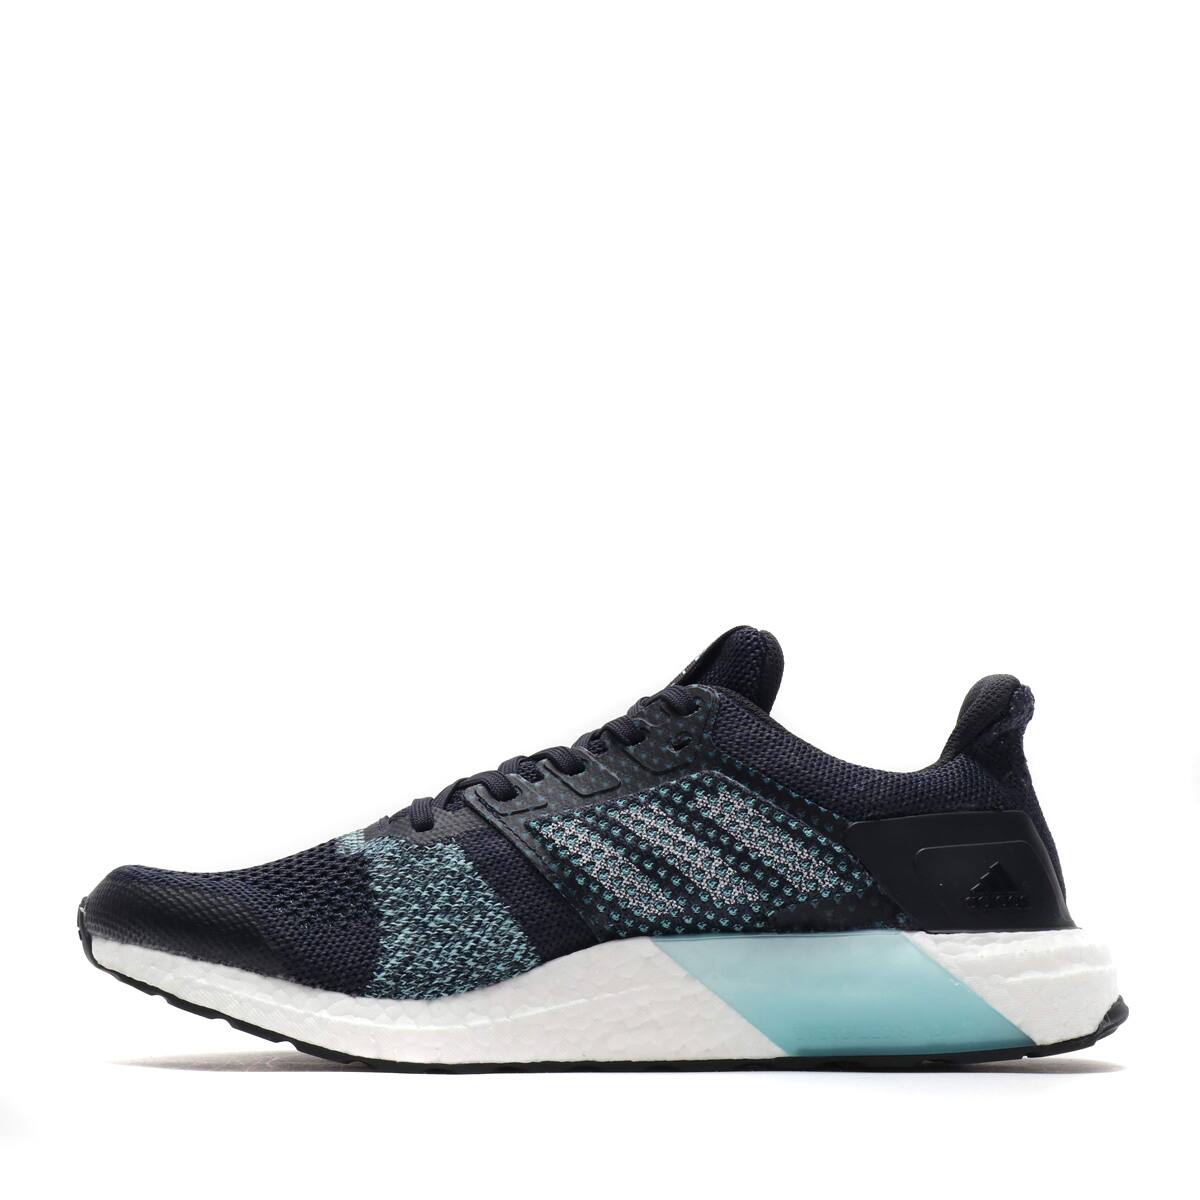 ultraboost st parley shoes